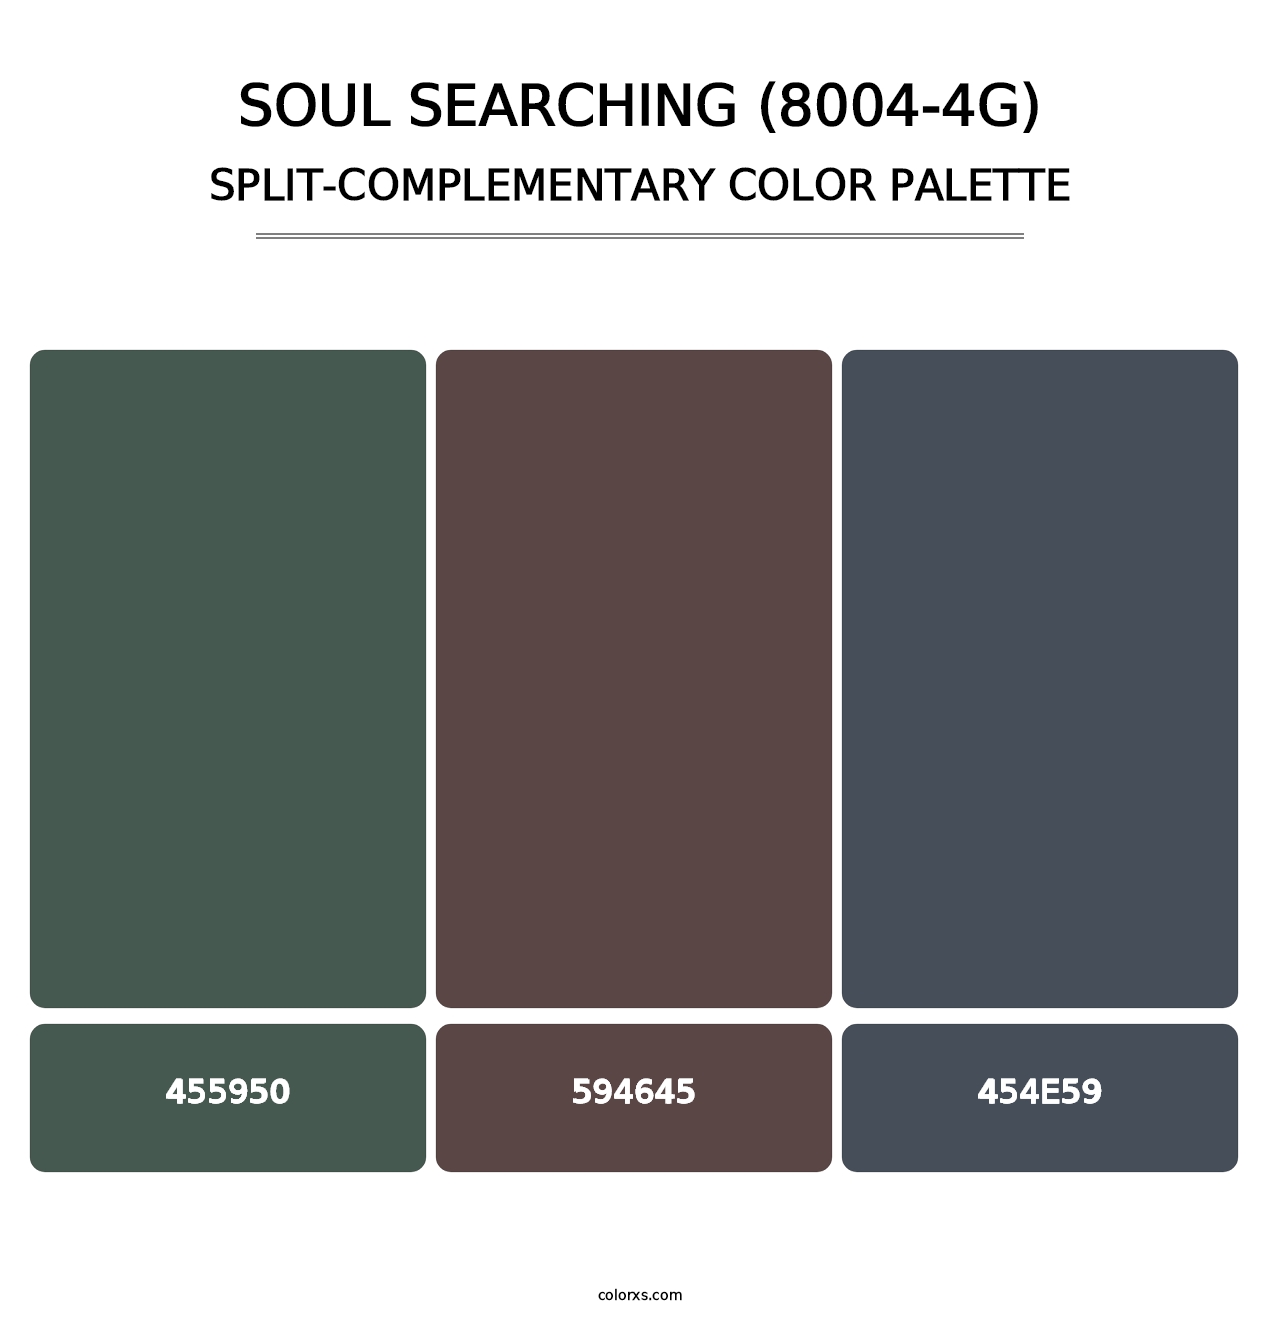 Soul Searching (8004-4G) - Split-Complementary Color Palette